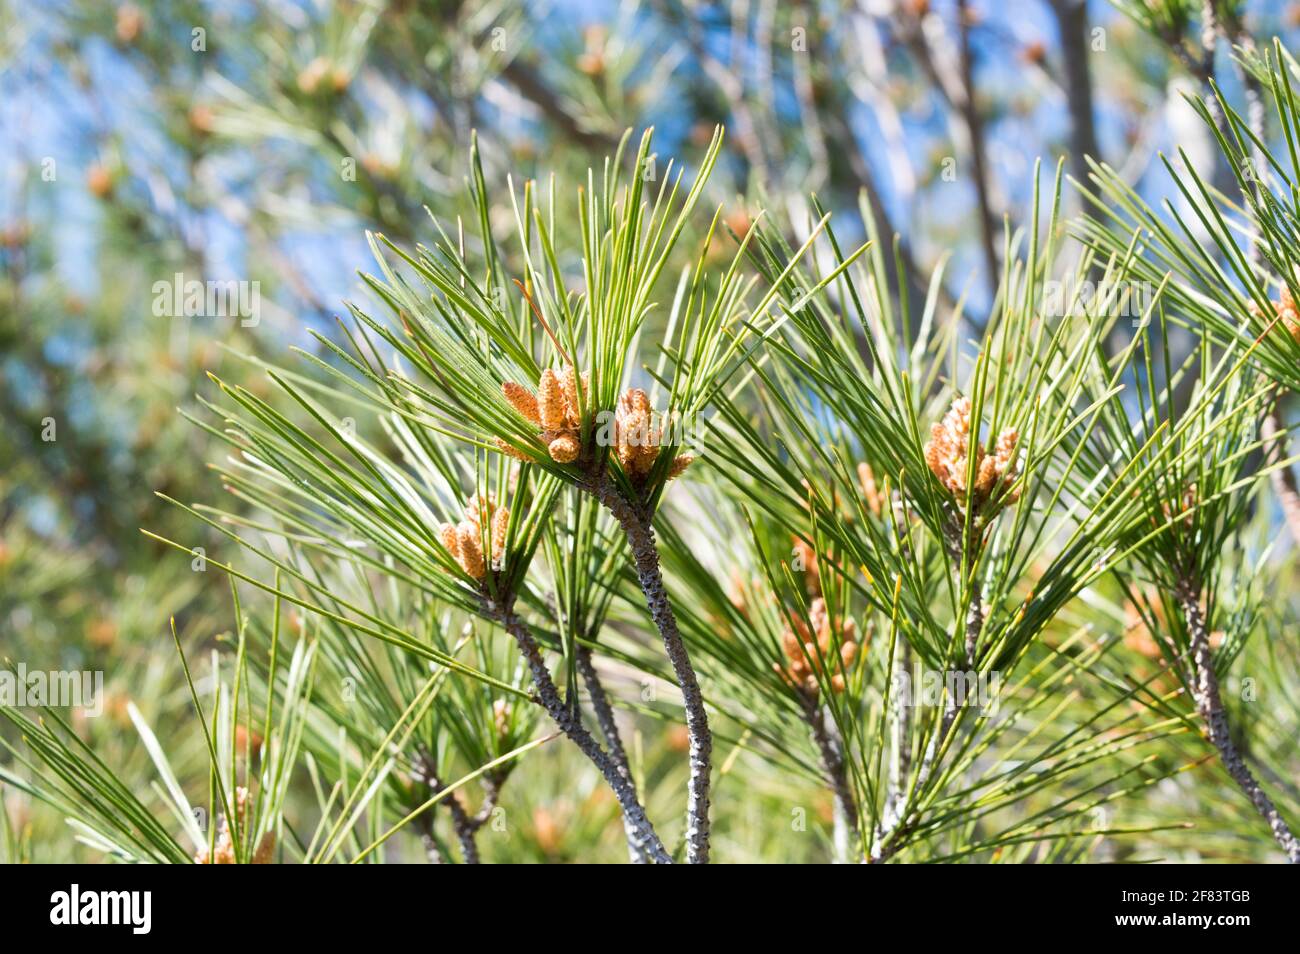 Young branches of aleppo pine tree, Pinus halepensis, with buds and needle-like leaves, during springtime, in Croatia, Dalmatia area Stock Photo